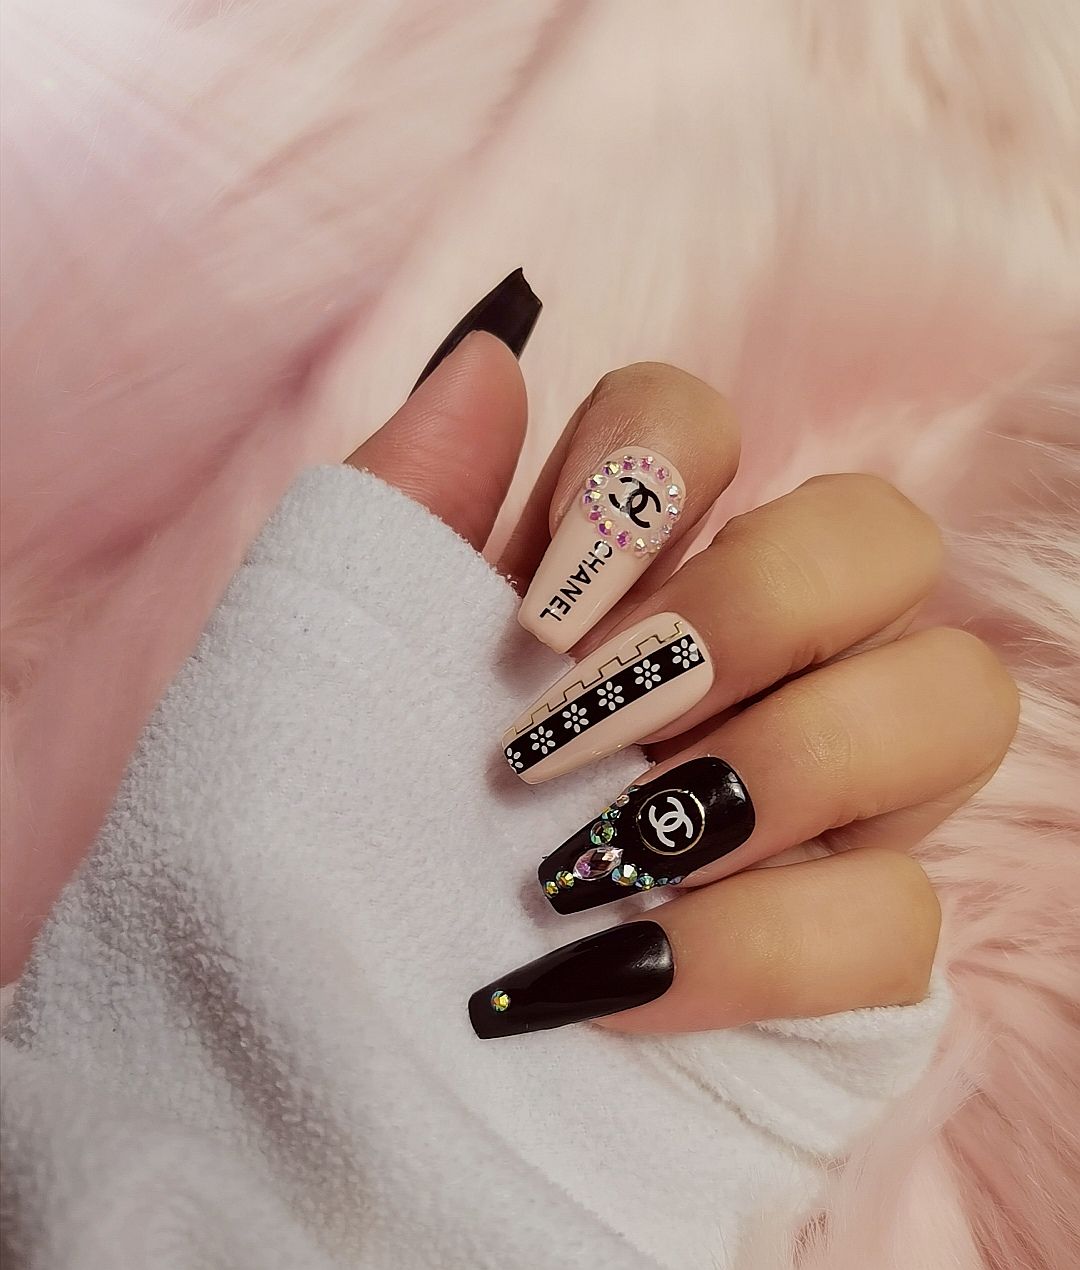 CHANEL INSPIRED NAILS PRESS ON LUXURY NAILS